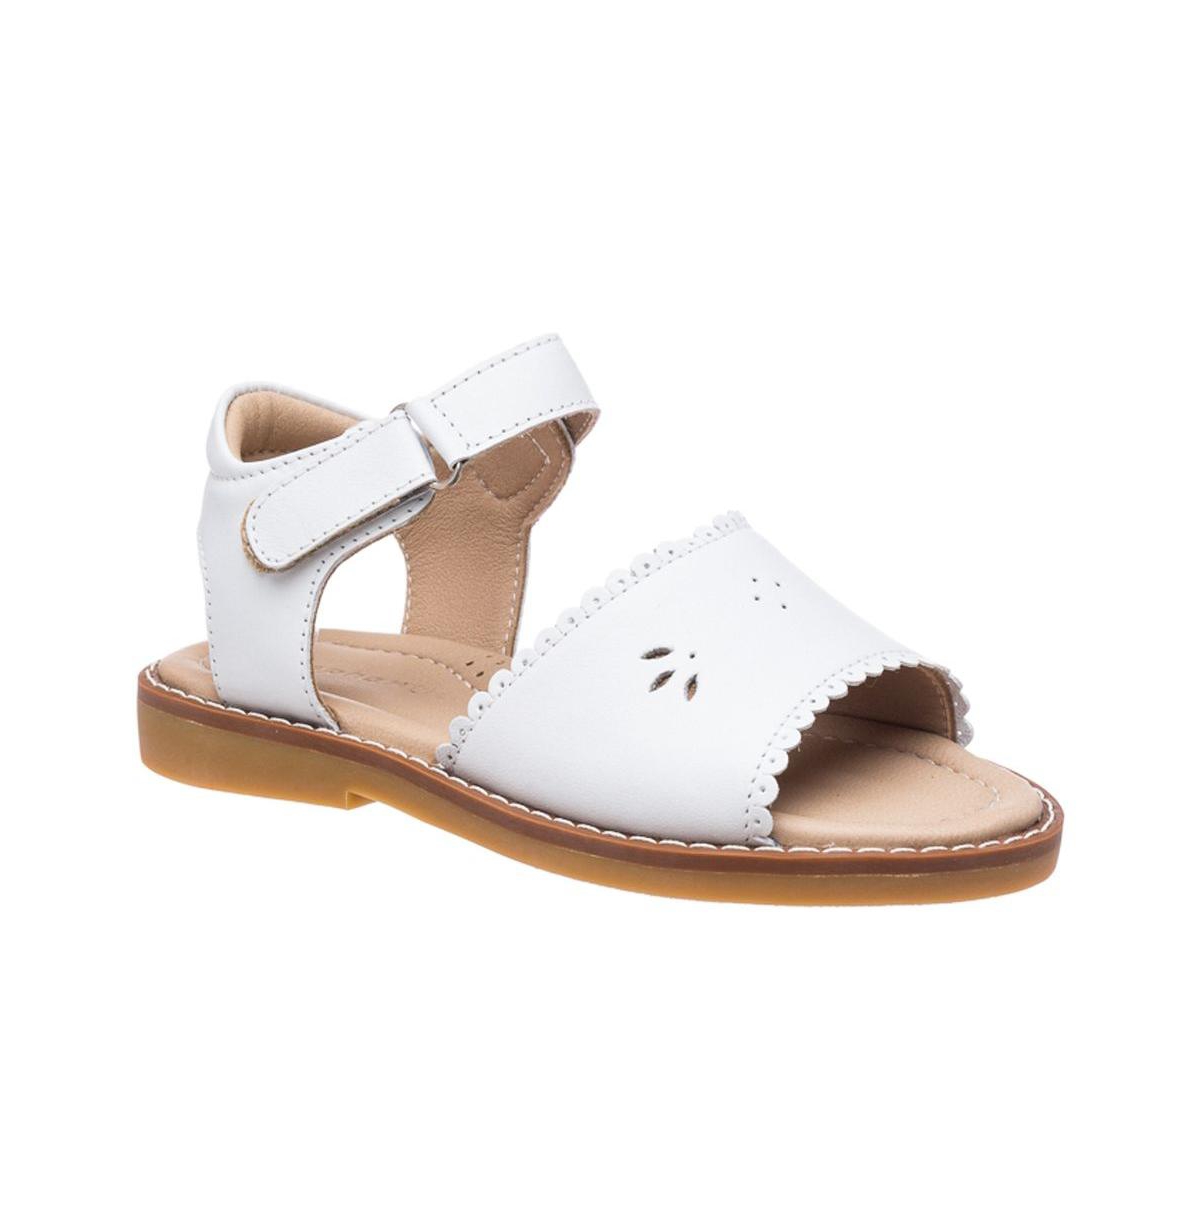 ELEPHANTITO TODDLER GIRL CLASSIC SANDAL WITH SCALLOP